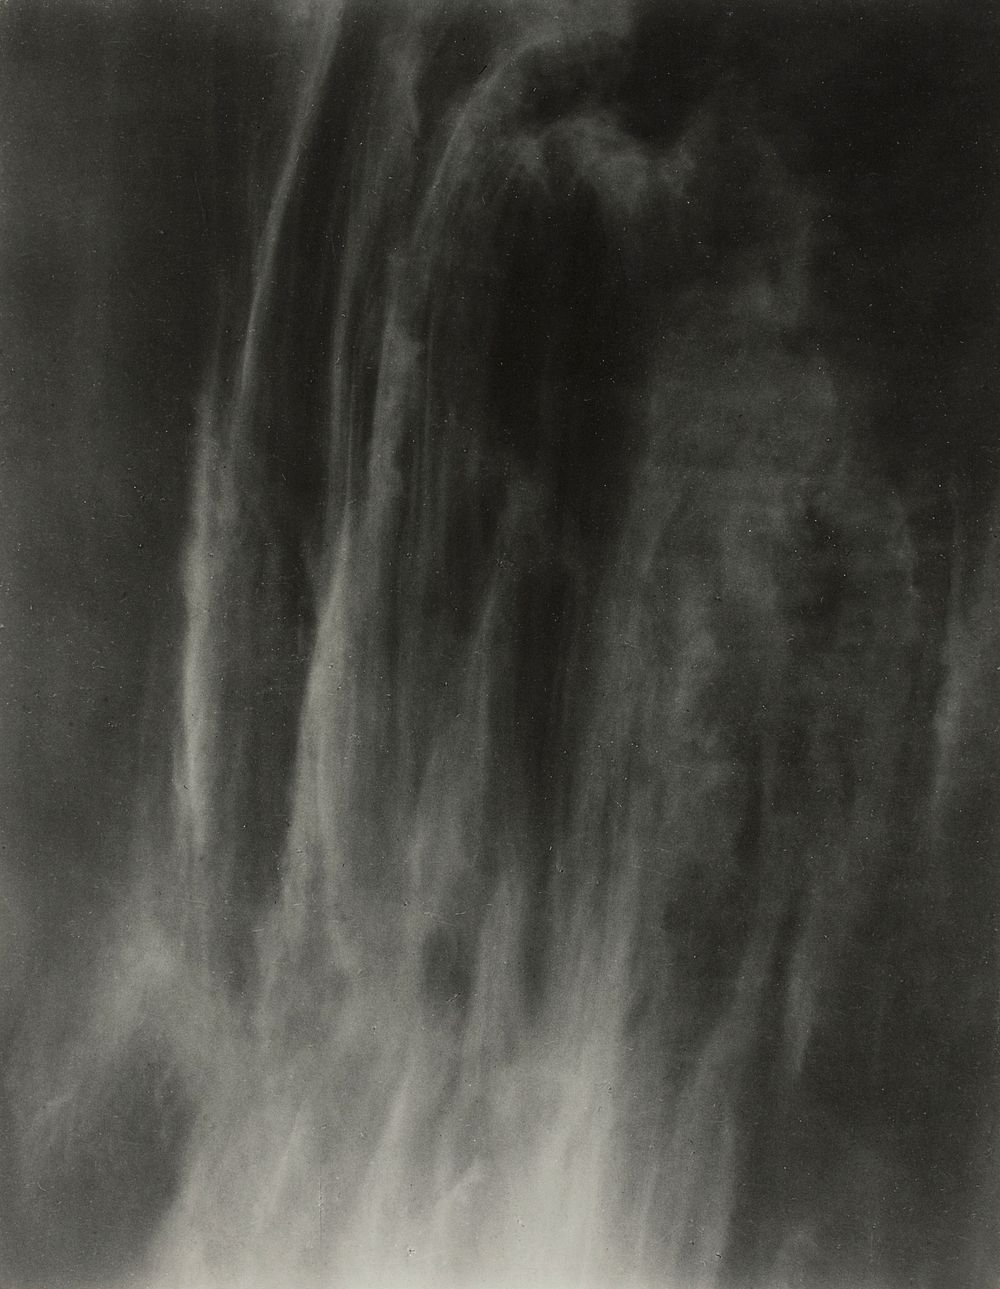 Equivalent (1925) by Alfred Stieglitz. Original from The Art Institute of Chicago. Digitally enhanced by rawpixel.